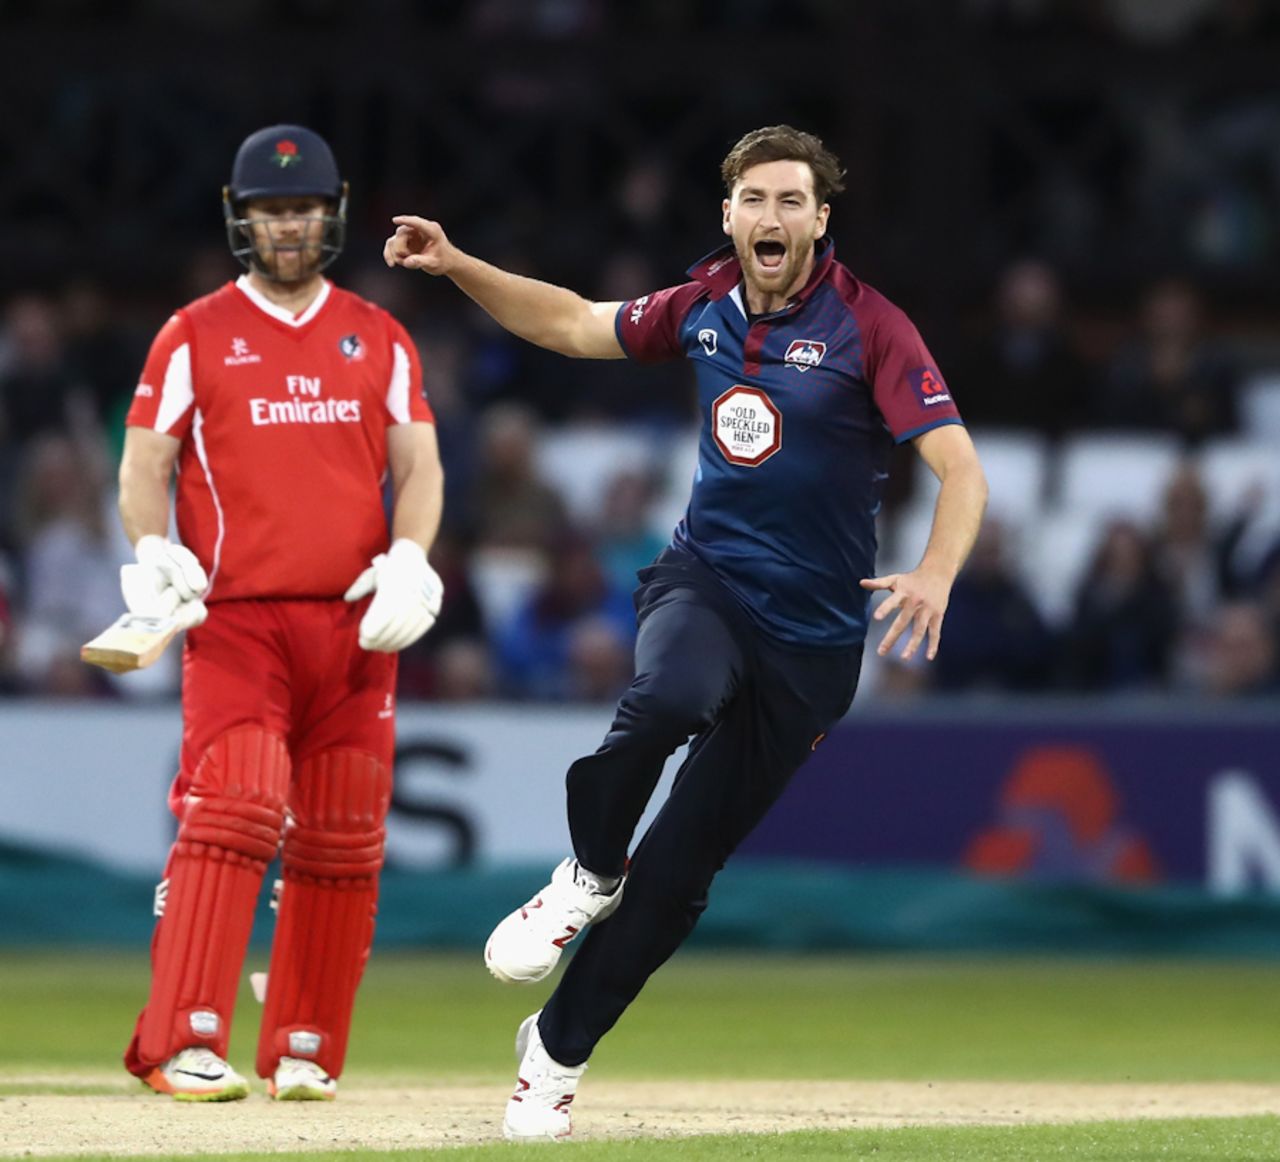 Richard Gleeson wheels away in delight after bowling Jos Buttler, Northants v Lancashire, NatWest Blast, North Group, Northampton, August 3, 2017